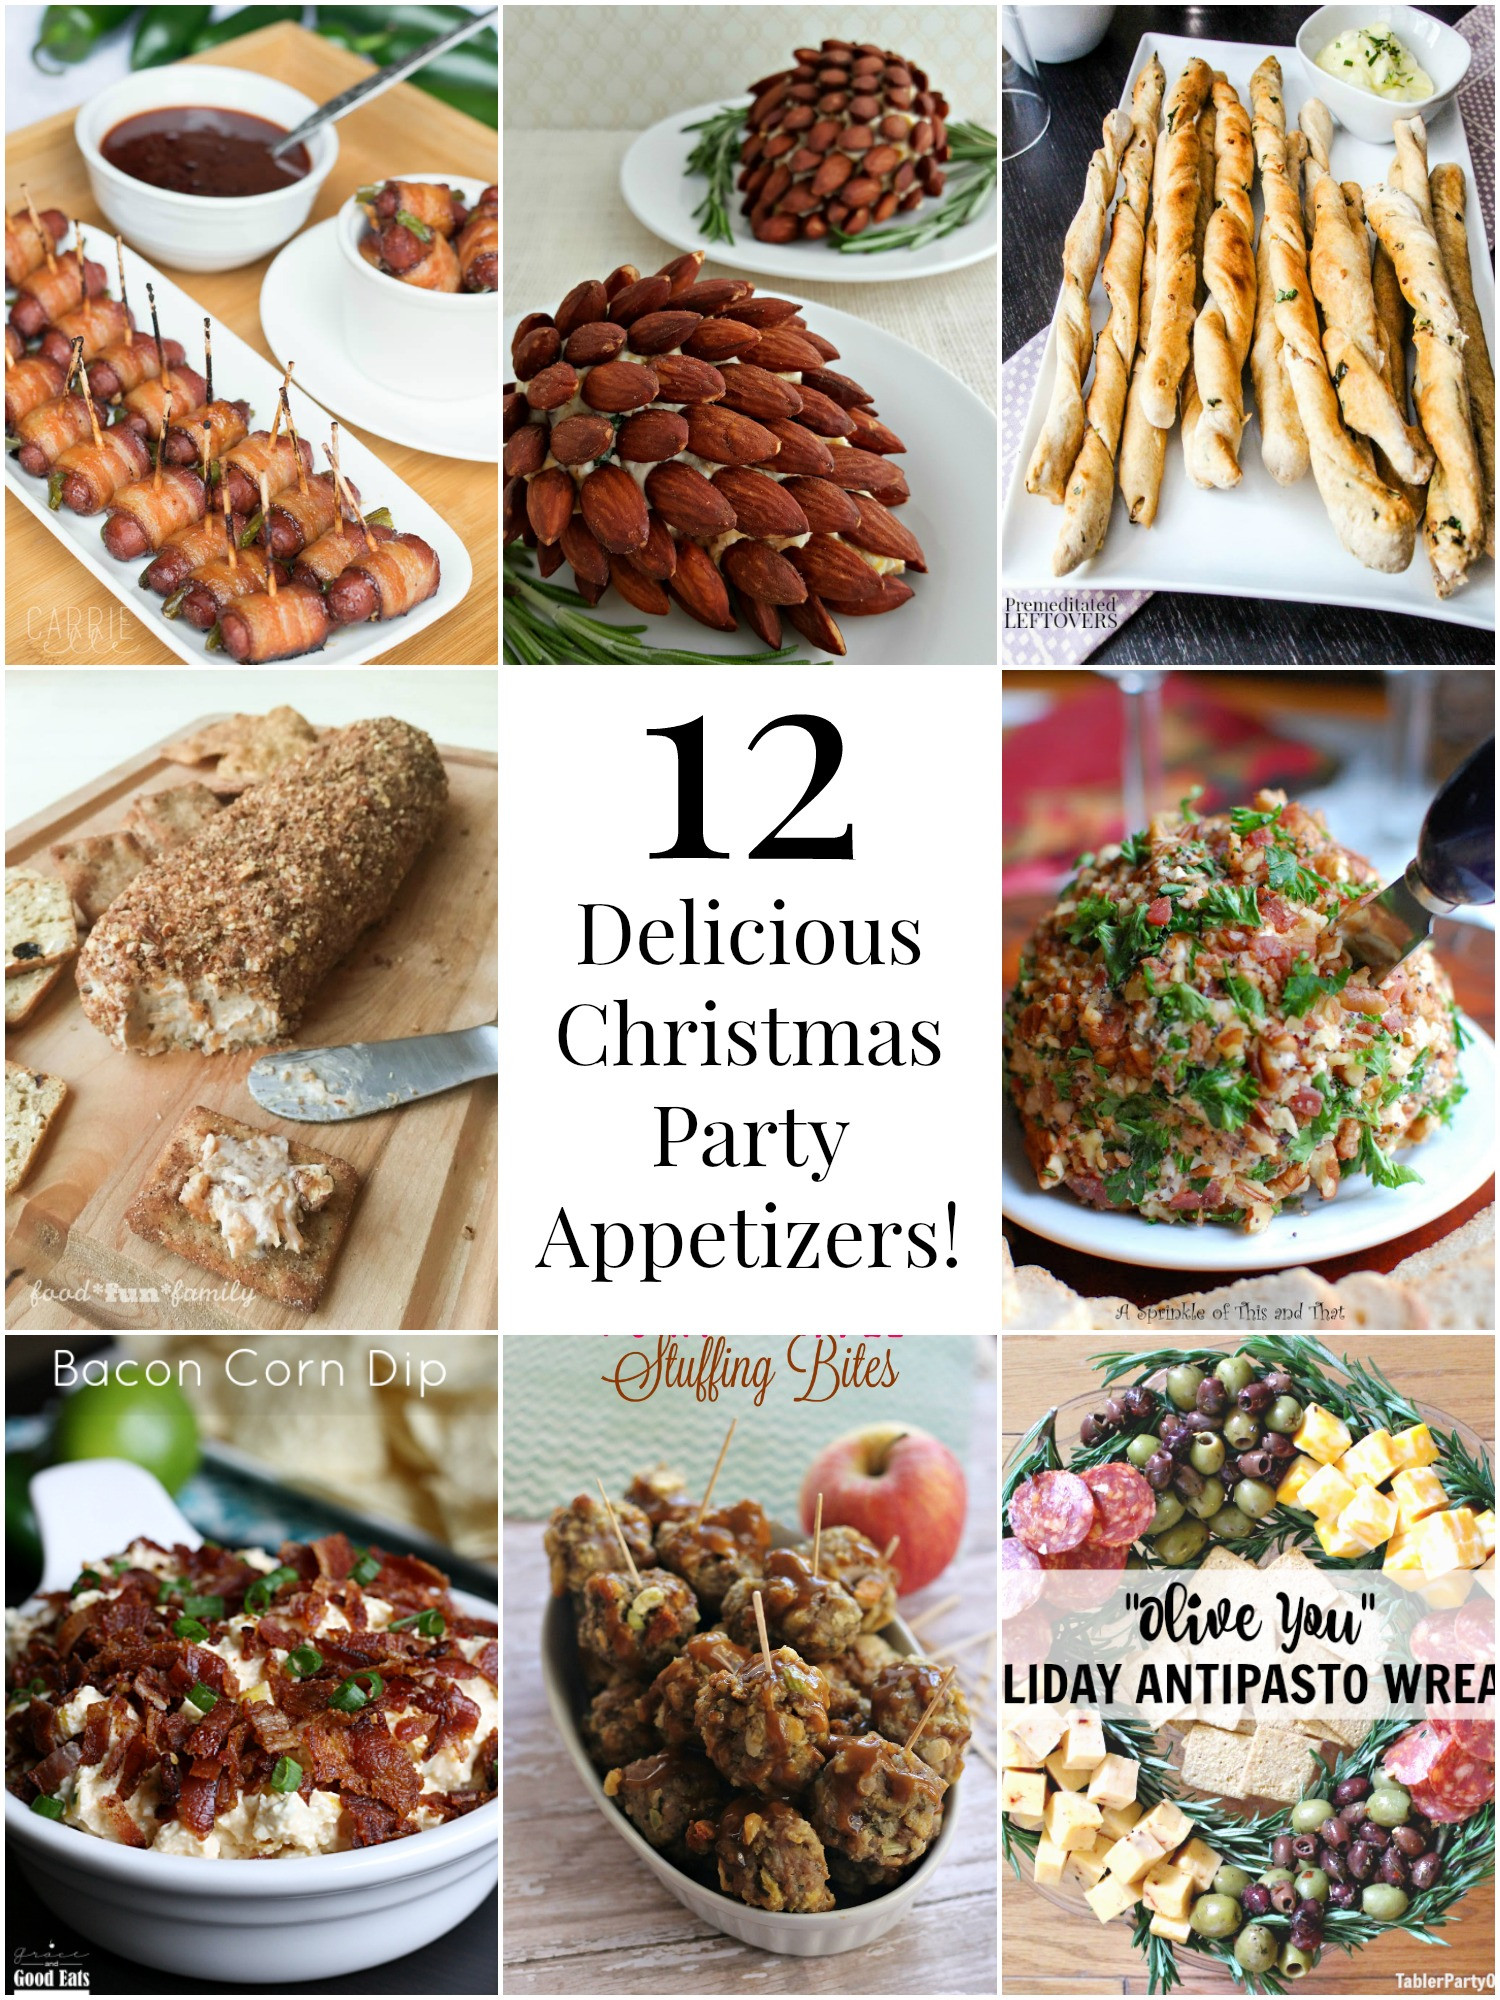 Party Appetizers Christmas
 So Creative 12 Delicious Christmas Party Appetizers